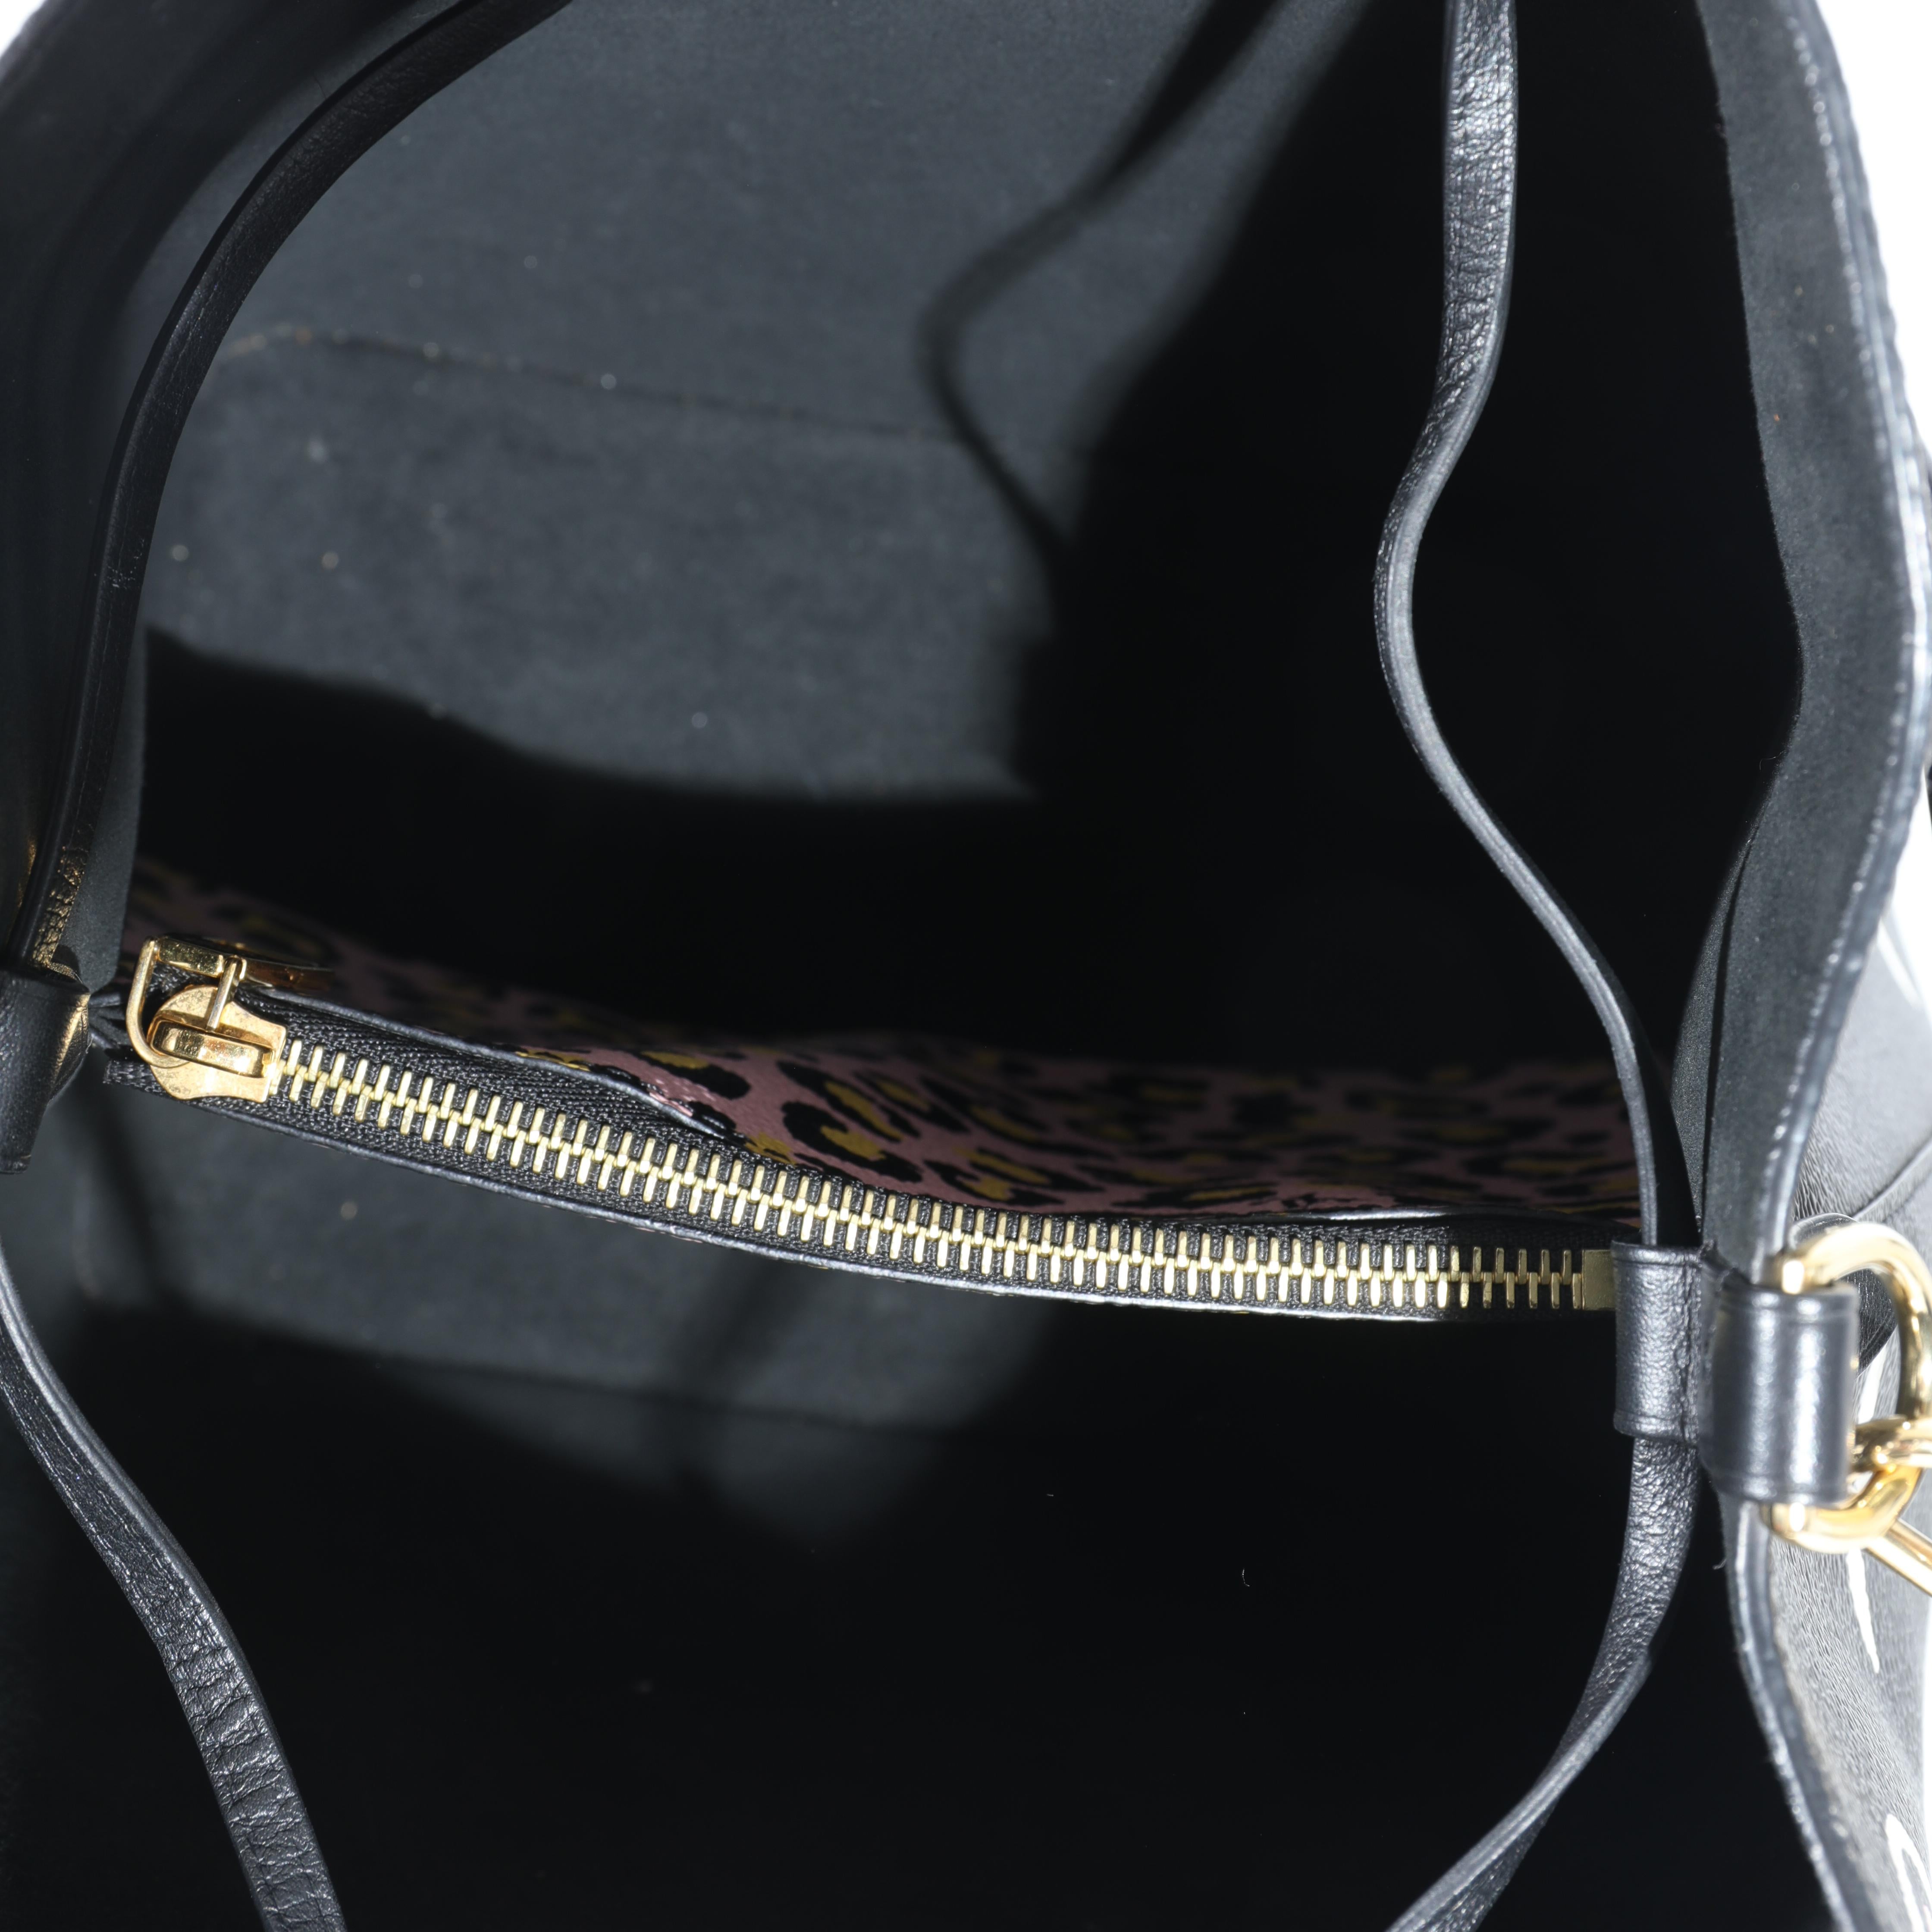 Listing Title: Louis Vuitton Black Giant Monogram Canvas Wild At Heart NeoNoe MM
SKU: 130804
Condition: Pre-owned 
Handbag Condition: Very Good
Condition Comments: Very Good Condition. Scuffing to corners. Scratching to hardware. Light discoloration